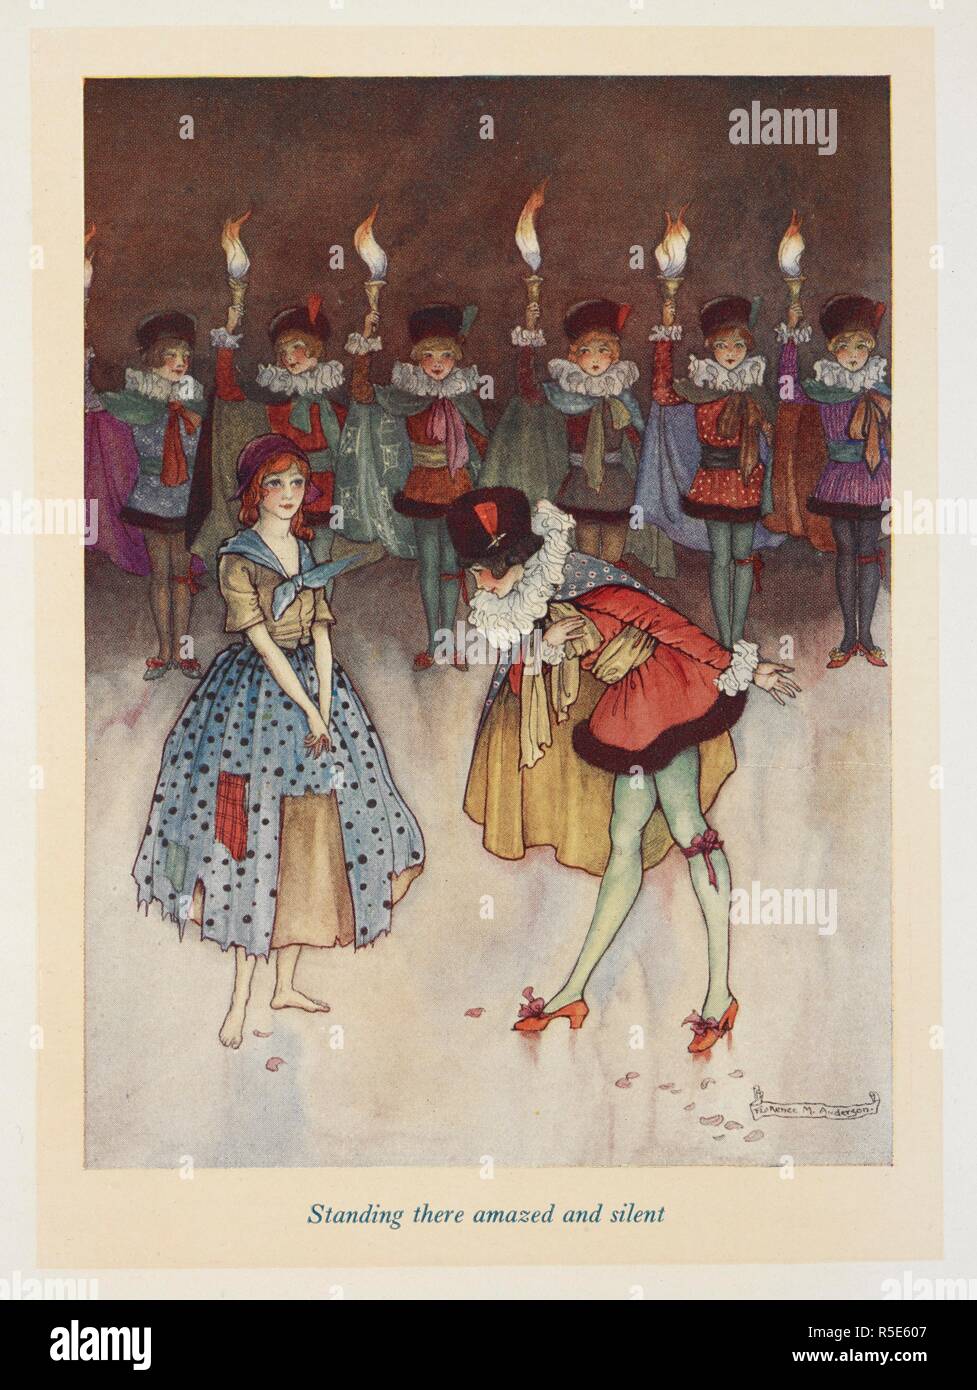 Standing there amazed and silent. Malvina, the little shepherdess. The Black Princess, and other fairy tales from Brazil-â€œContos para CriancÌ§as.â€ Translated from the Portuguese of â€œChrysantheÌ€meâ€ by Christie T. Young. Illustrated by Florence Mary Anderson. London : Simpkin, Marshall & Co., [1916]. Source: 12410.ppp.7 opposite page 142. Stock Photo